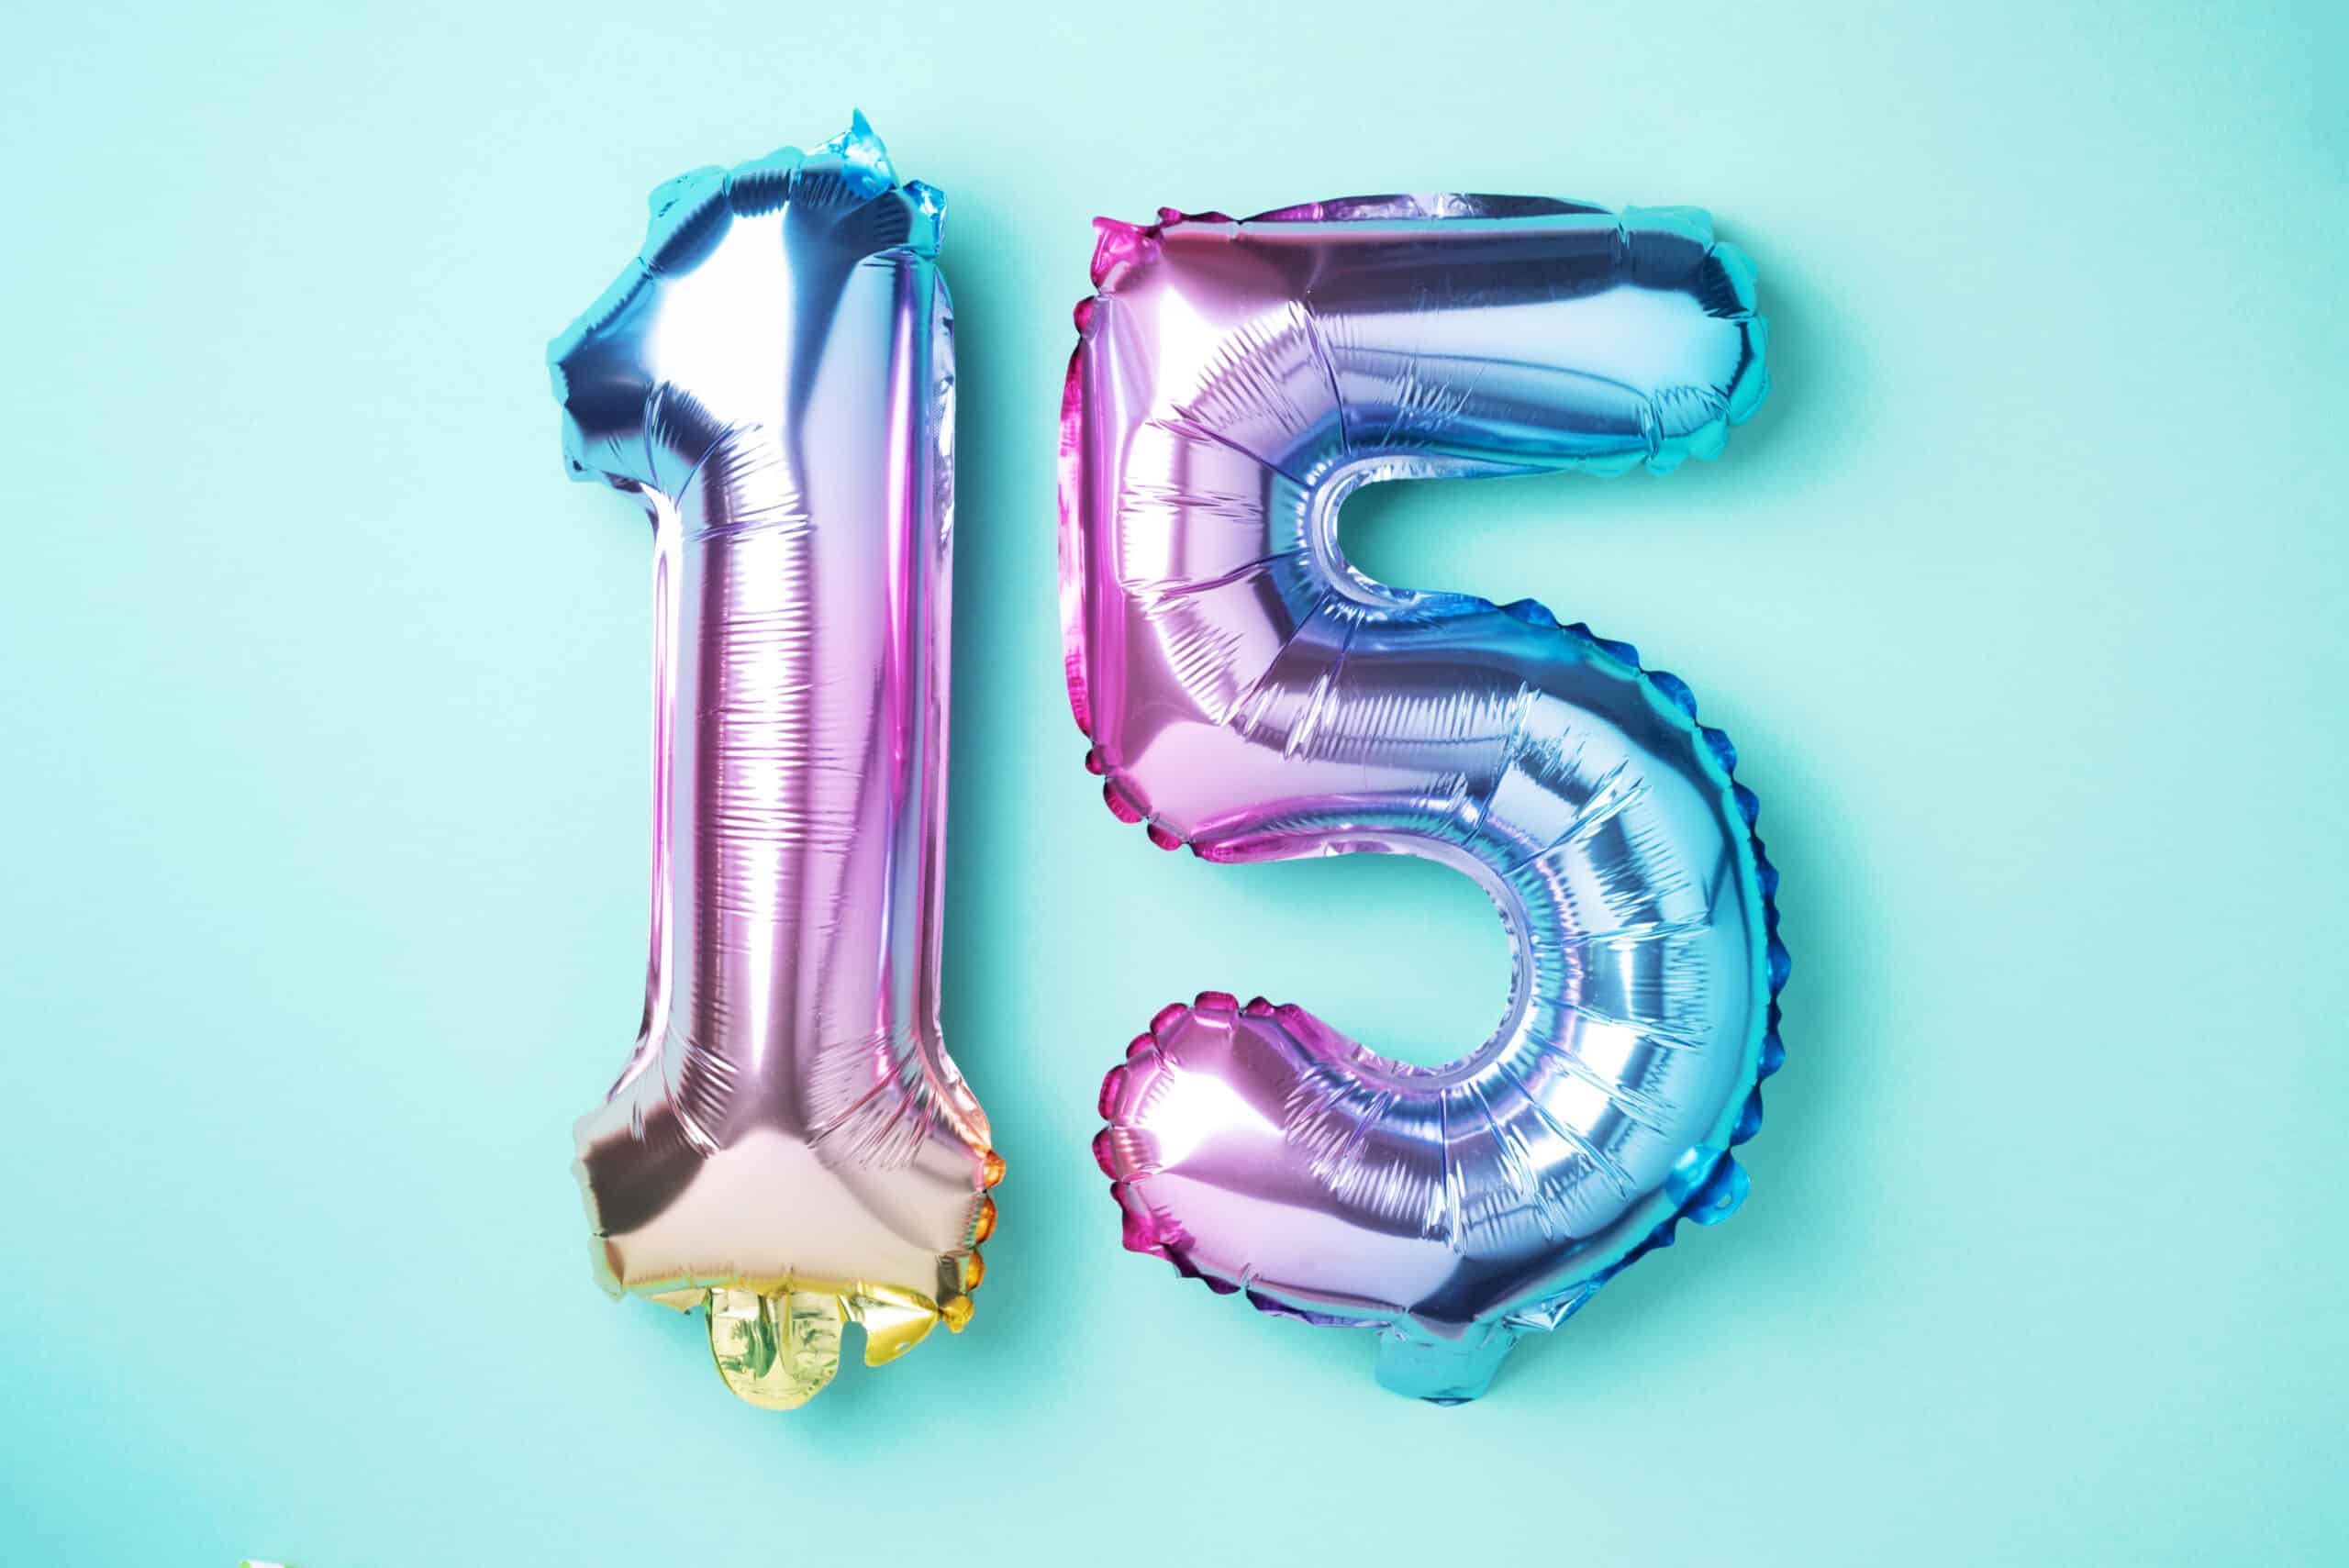 A group of foil balloons forming the number 15 on a blue background.